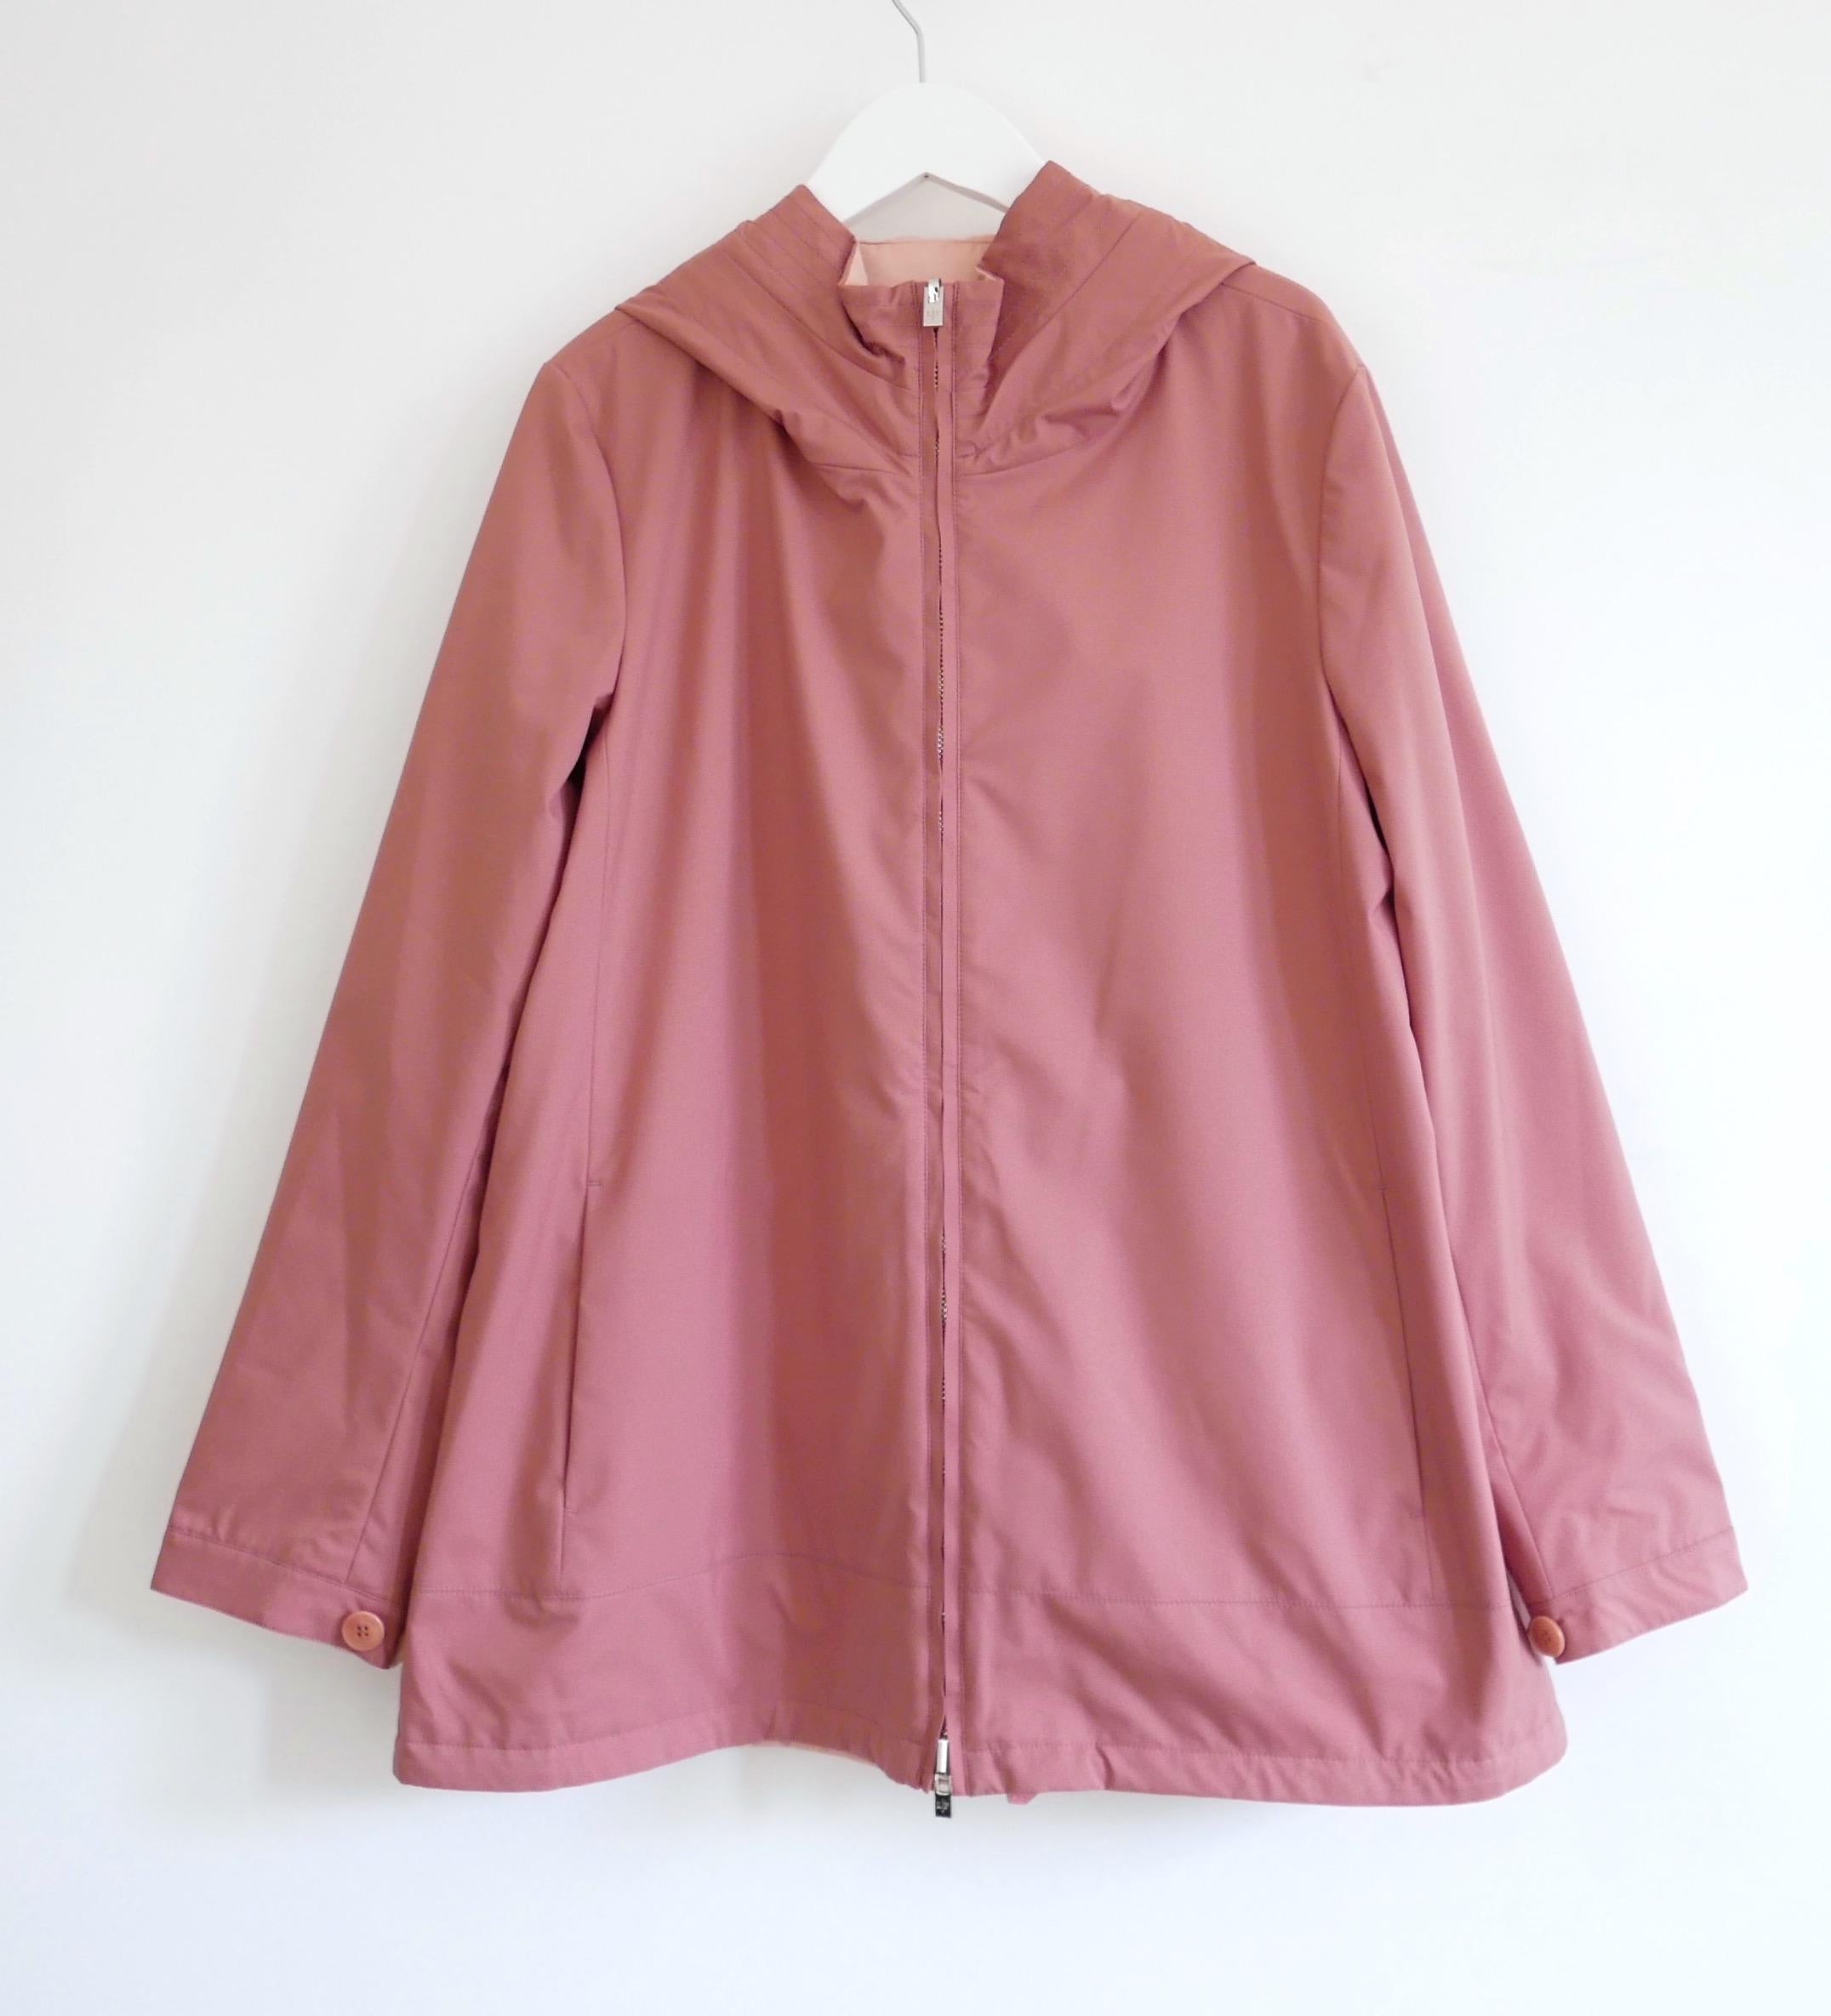 Loro Piana Ashton Reversible Anorak Jacket Antique Pink/Light Rose In New Condition For Sale In London, GB